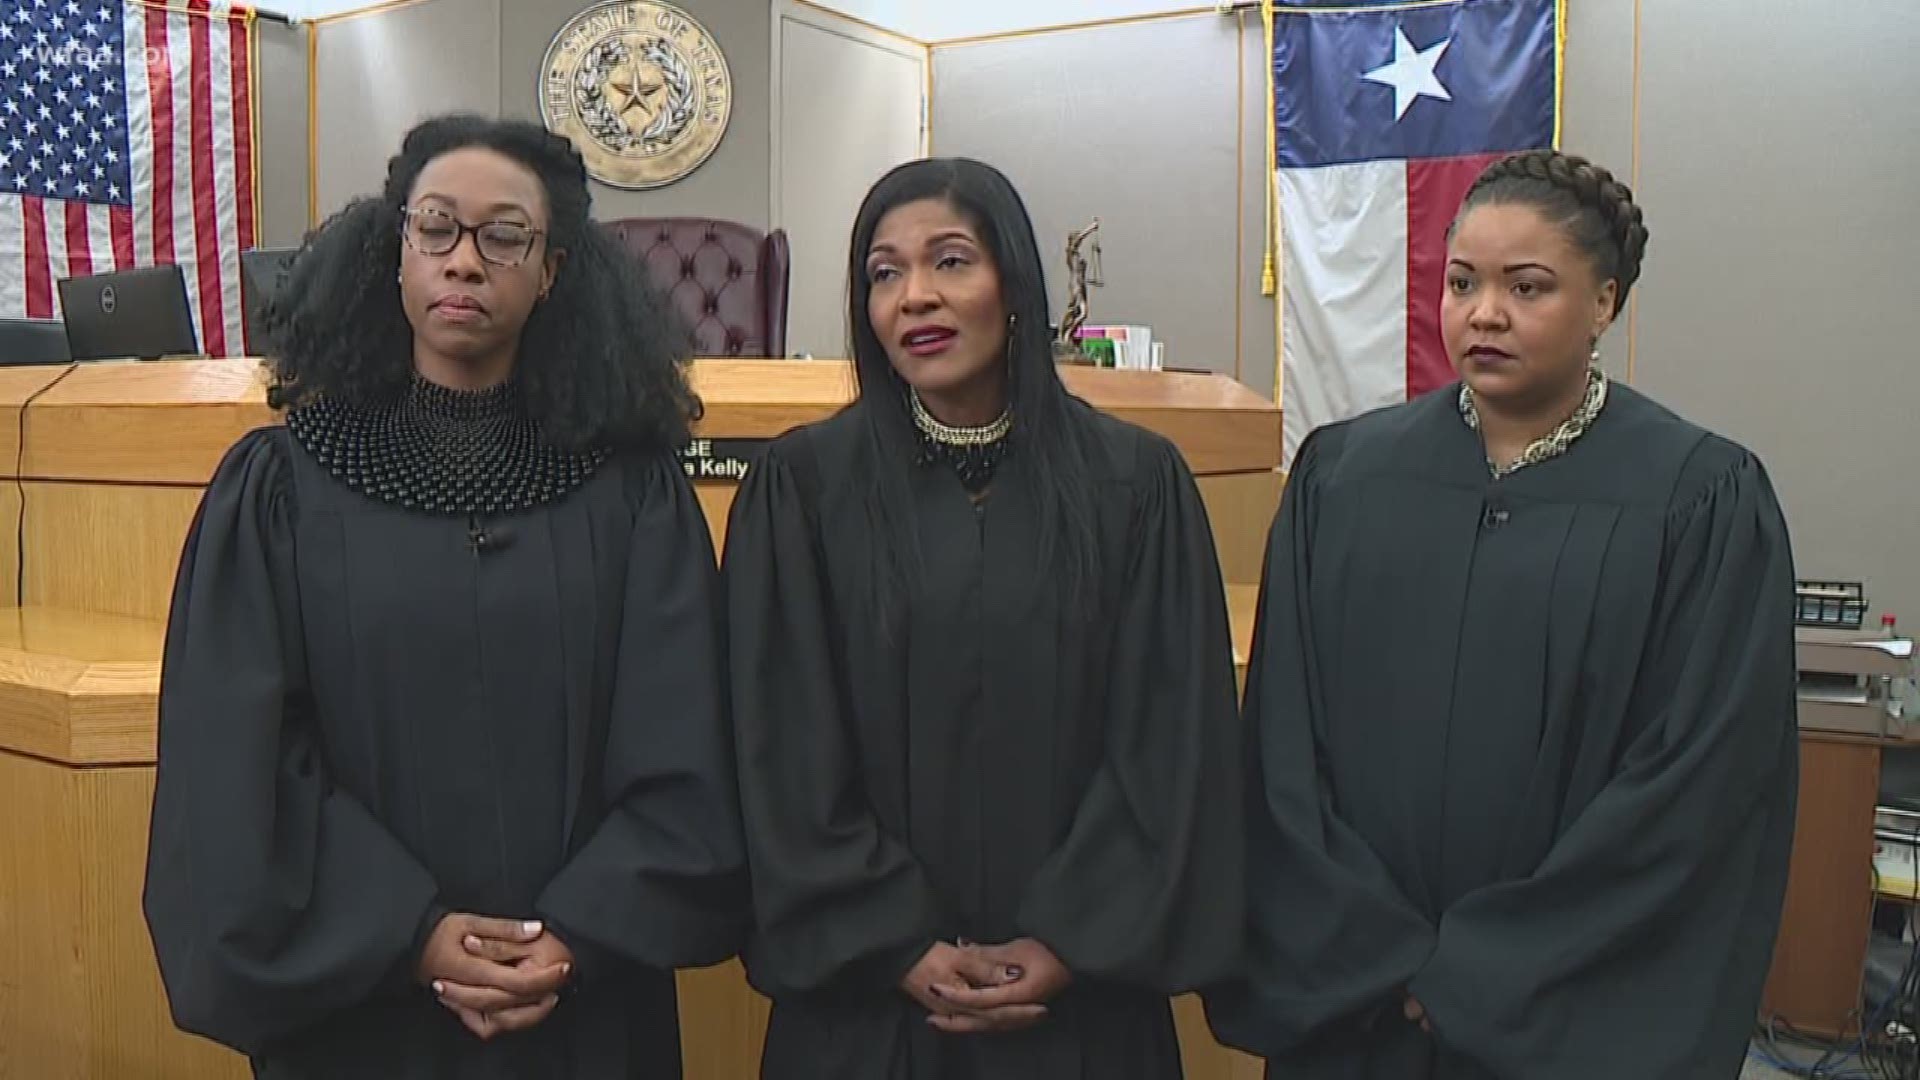 Four Dallas County judges are behind the mentoring program, which received national attention.